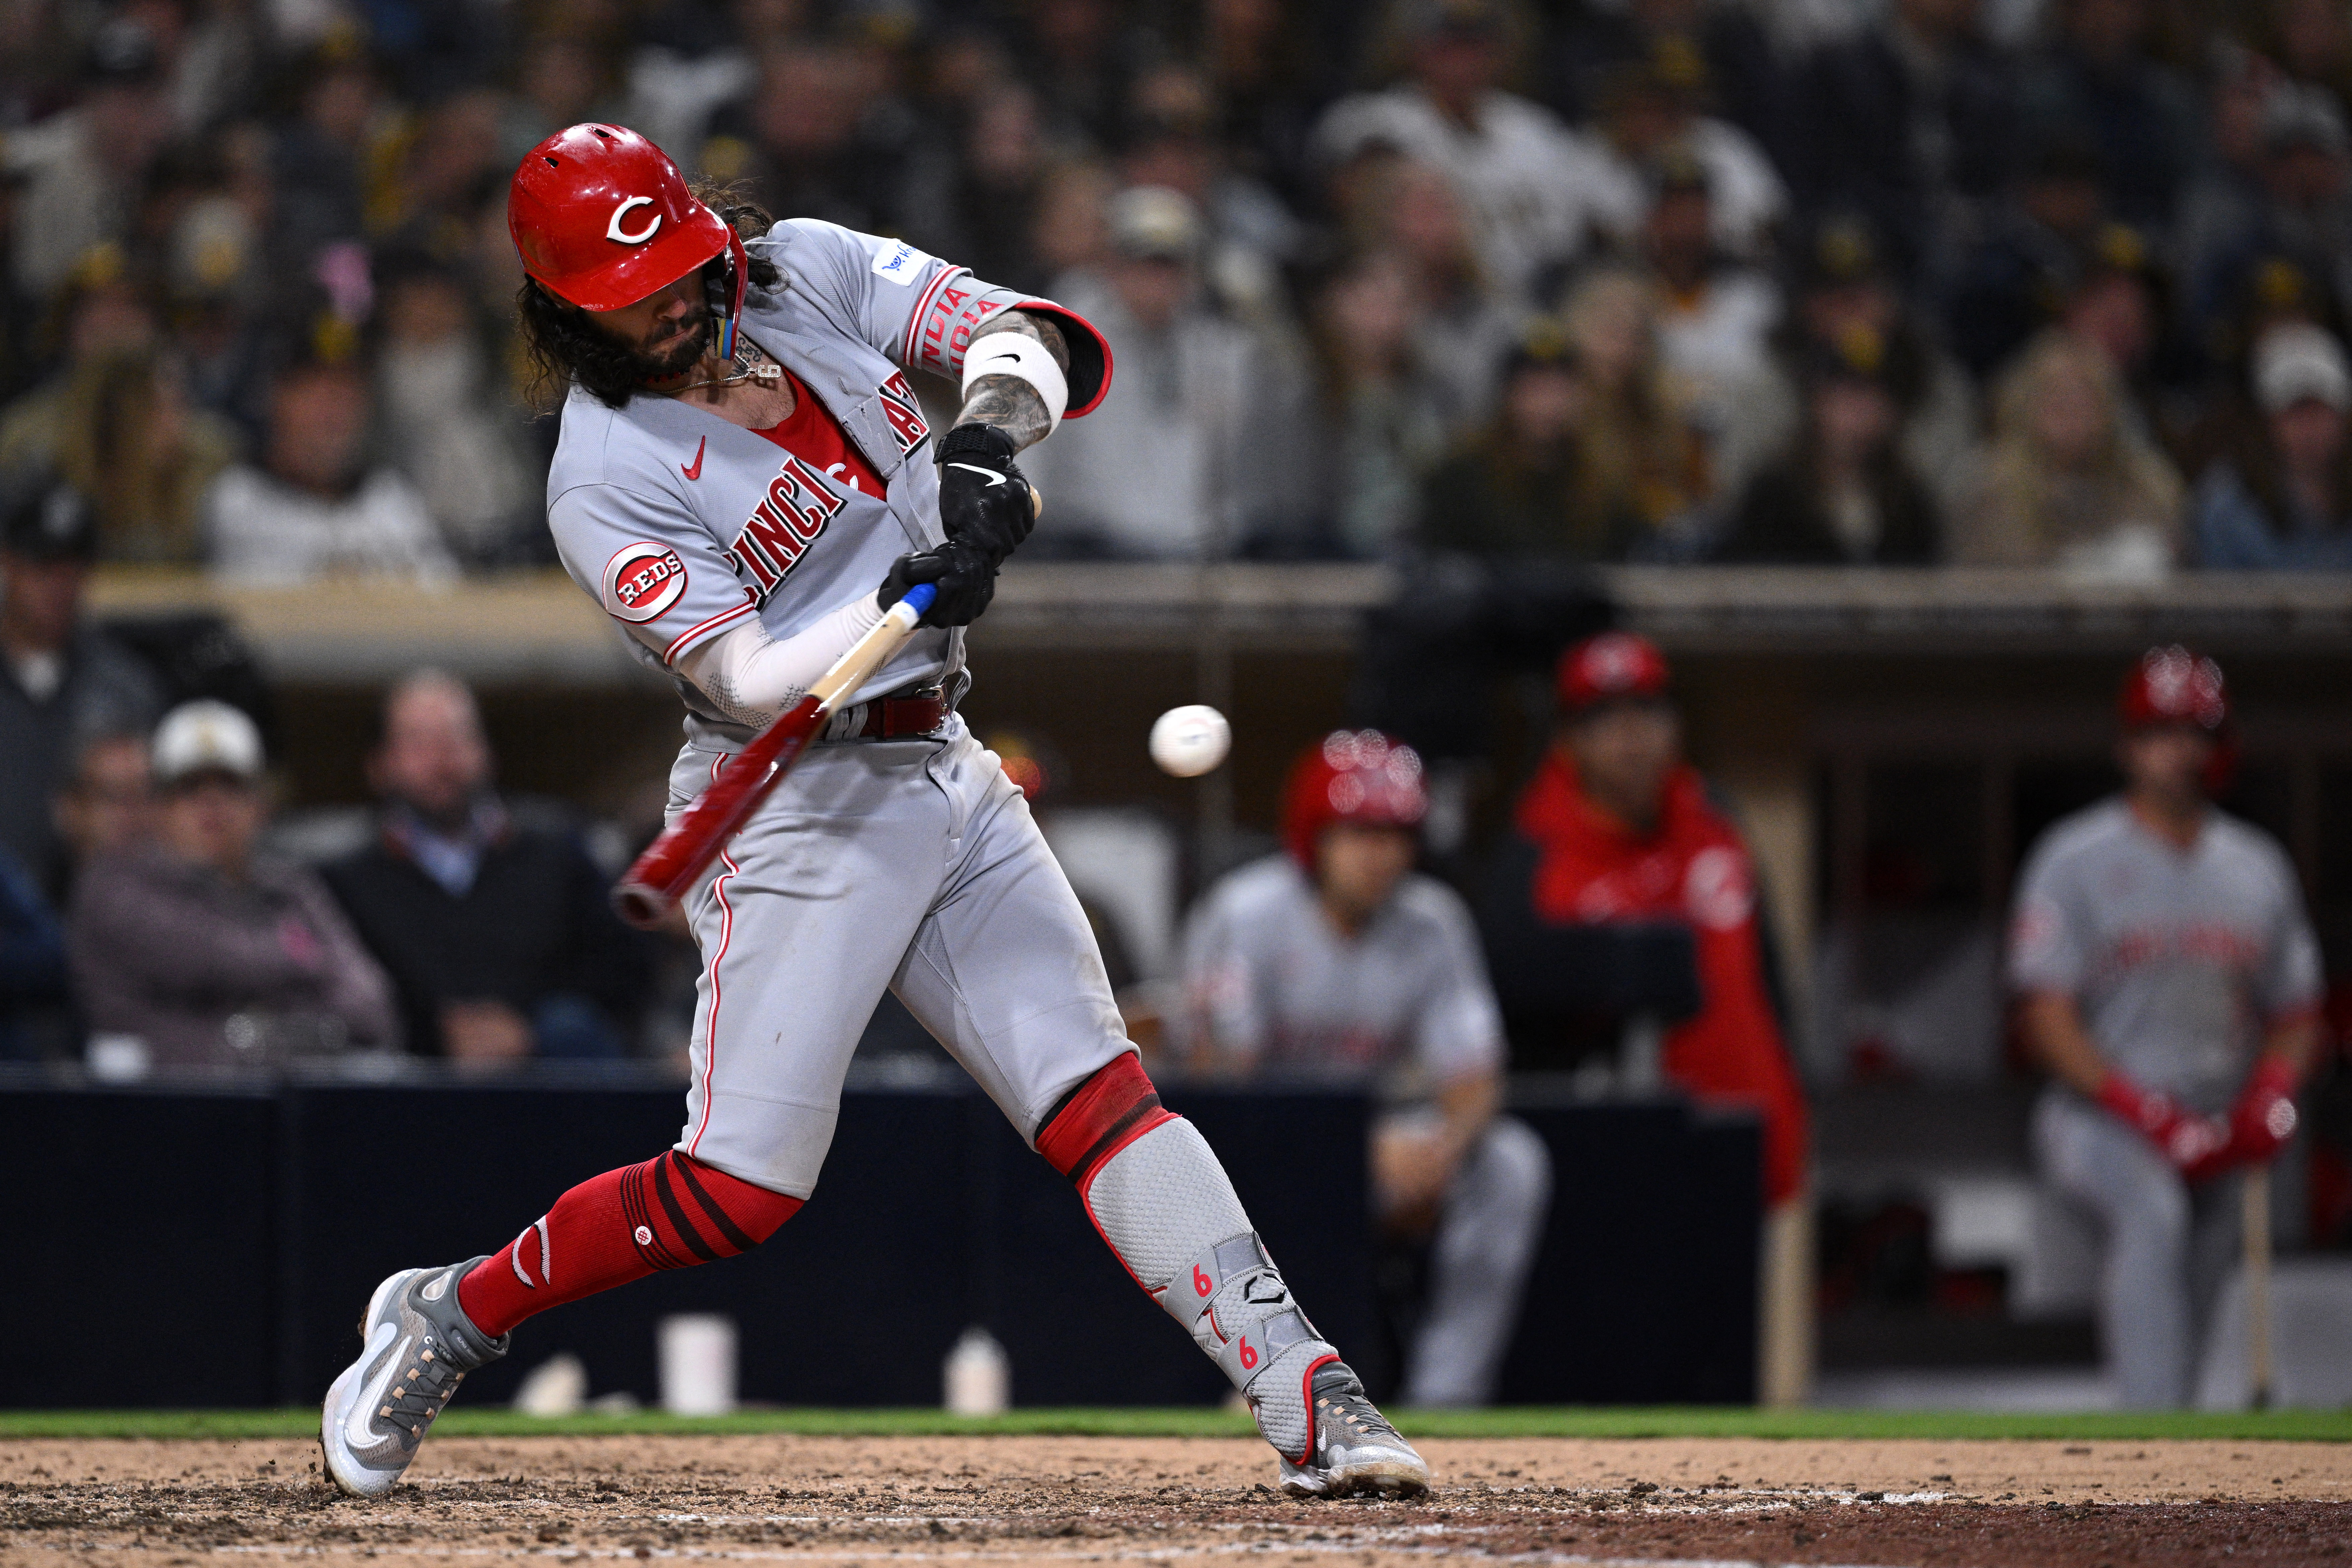 CJ Abrams home run lifts surging Nationals past skidding Yankees